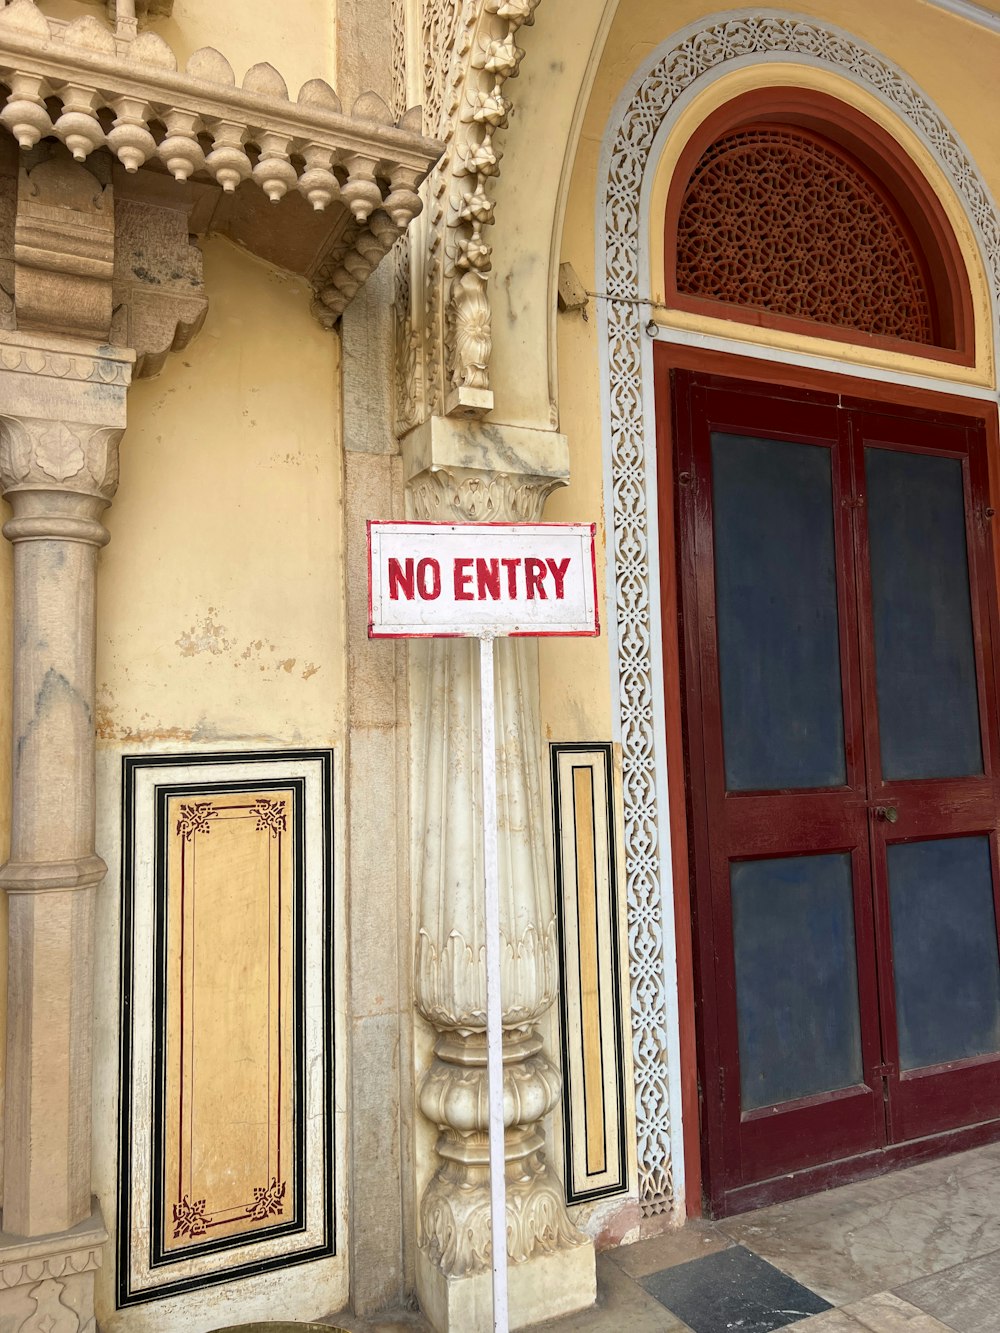 a no entry sign in front of a building